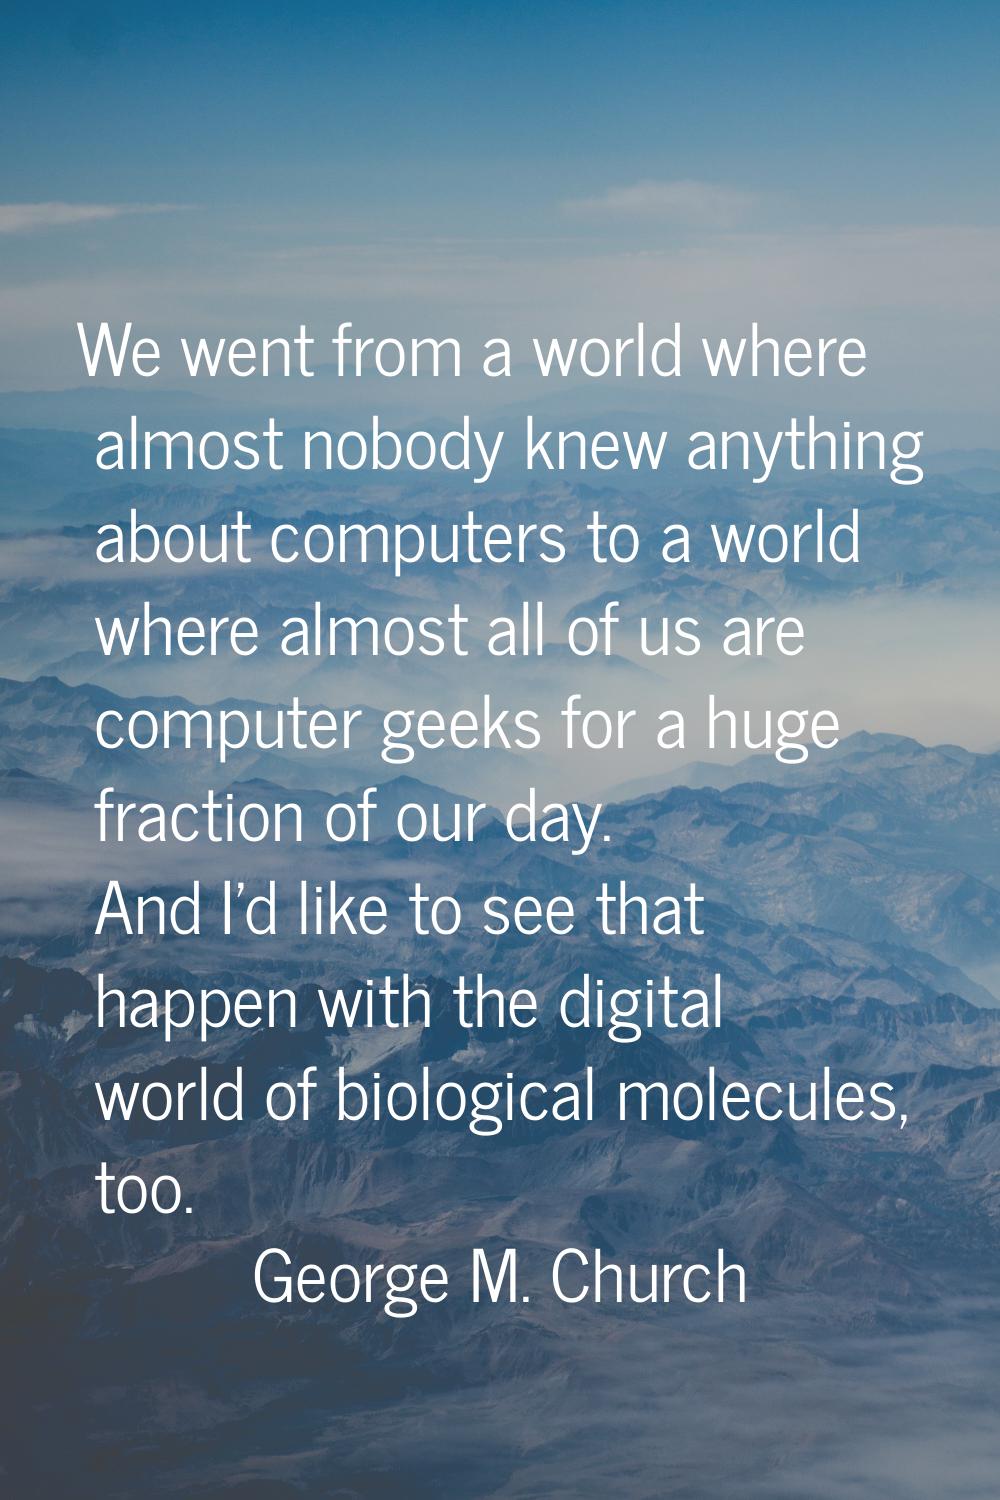 We went from a world where almost nobody knew anything about computers to a world where almost all 